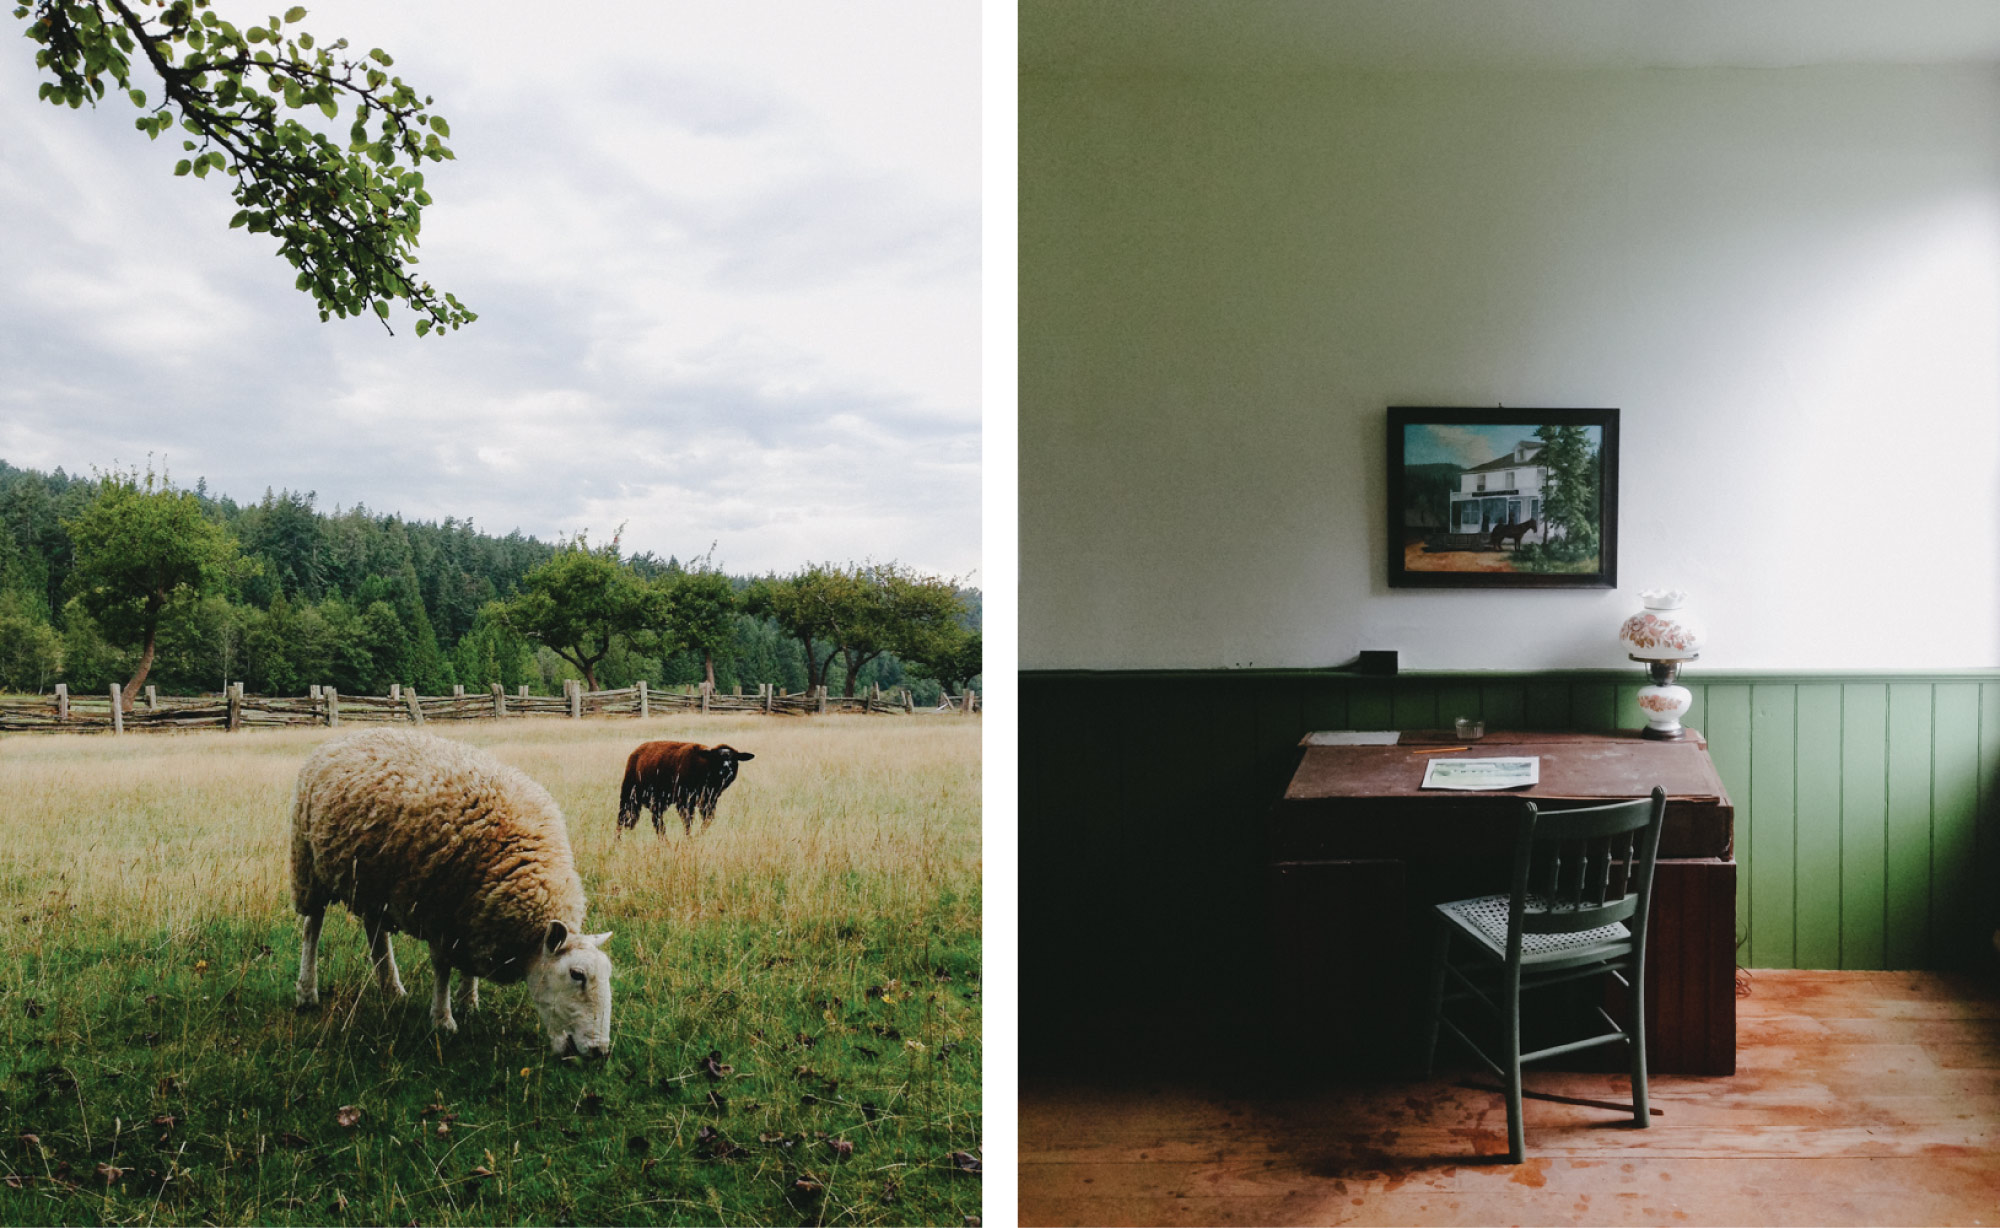 Two images side by side. On the left, two sheep graze in an open field. On the right, a small brown desk with a green chair. A portrait hangs above the desk.